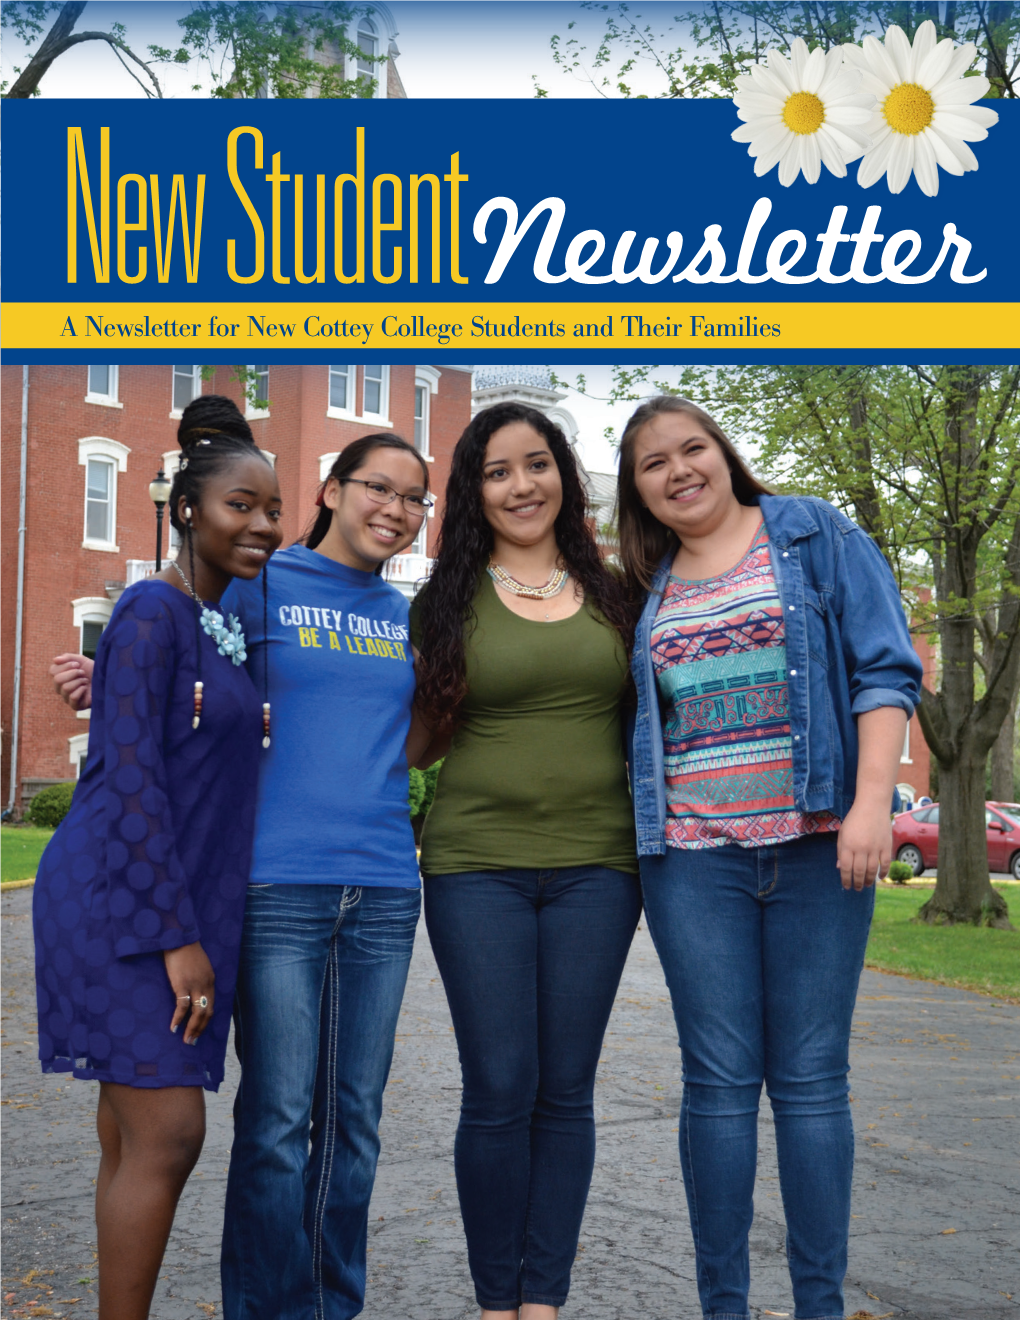 A Newsletter for New Cottey College Students and Their Families